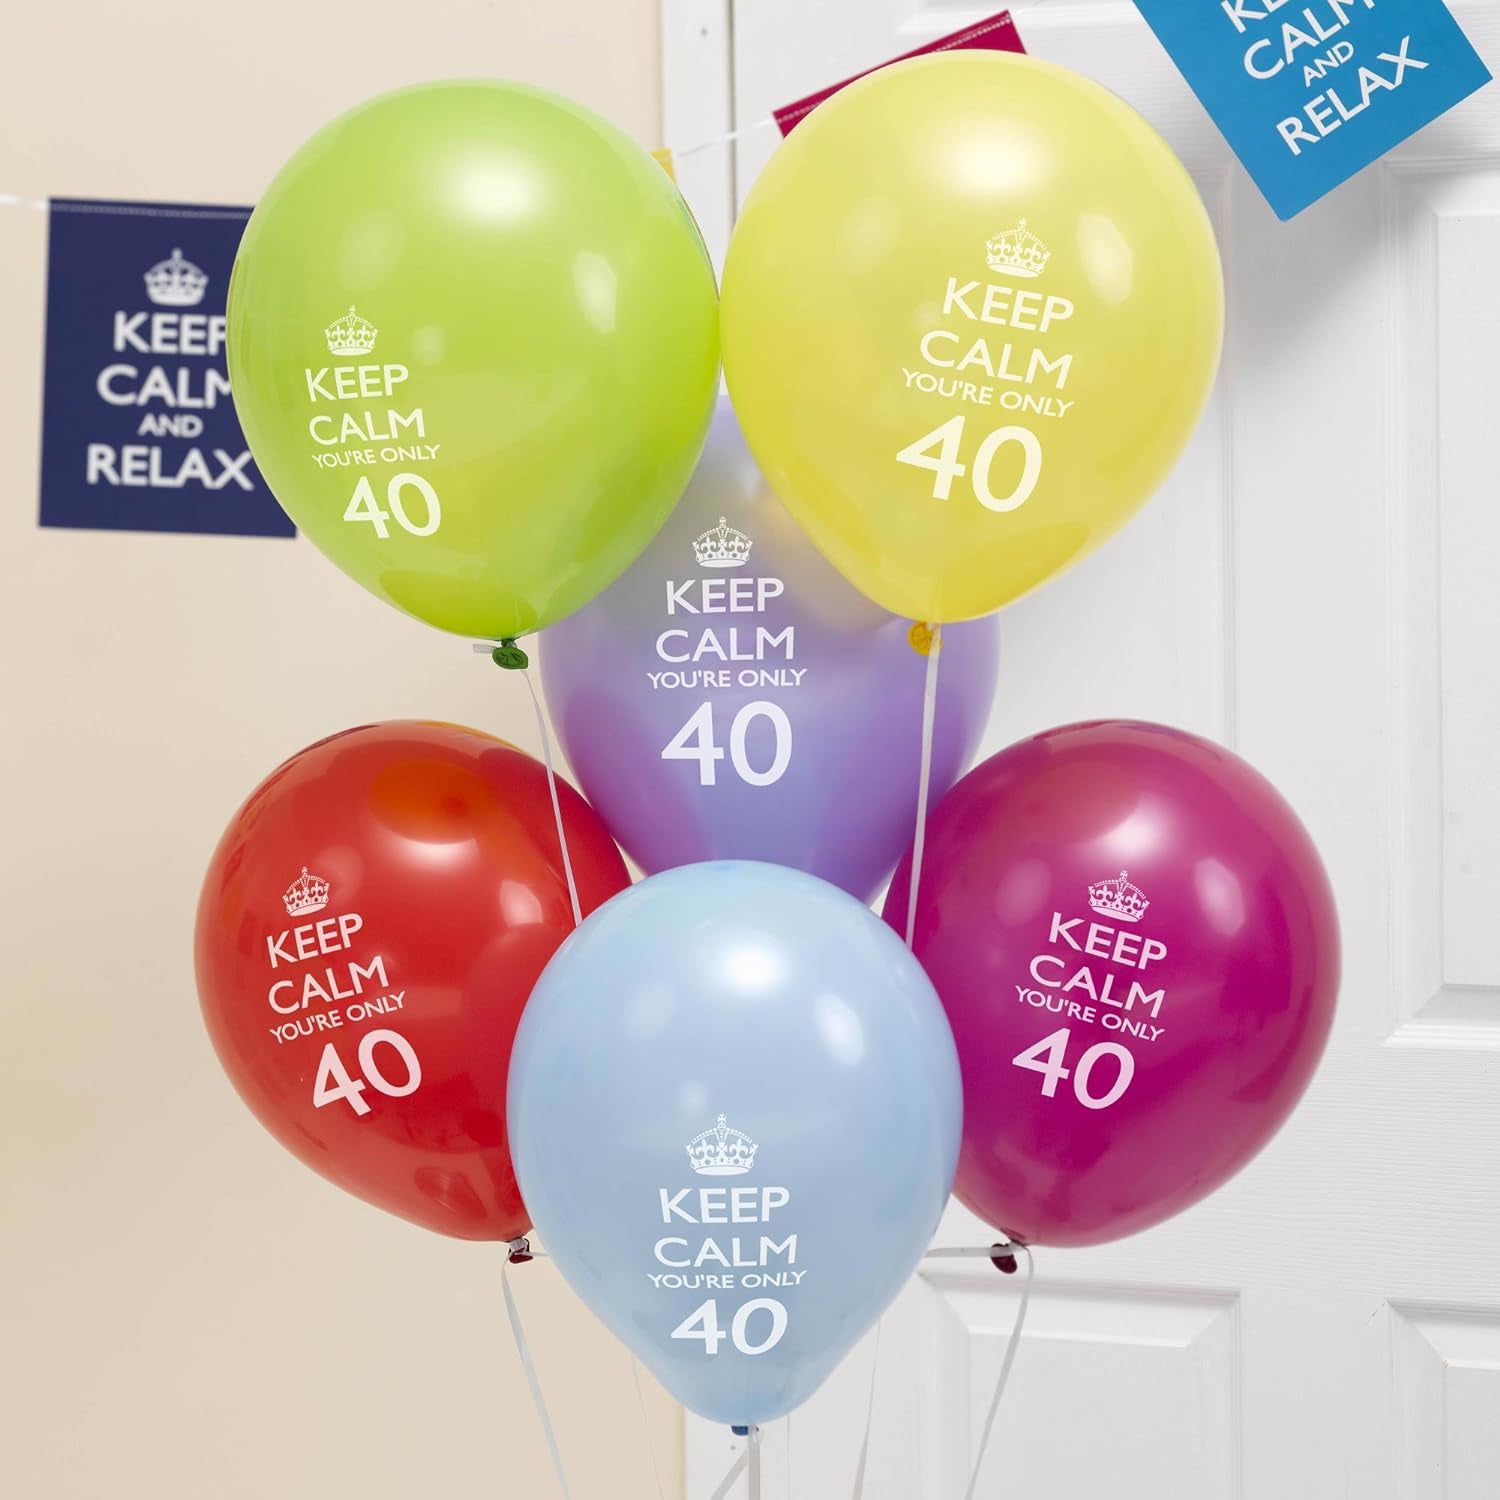 Keep Calm You're Only 40 Balloons - Pack of 8